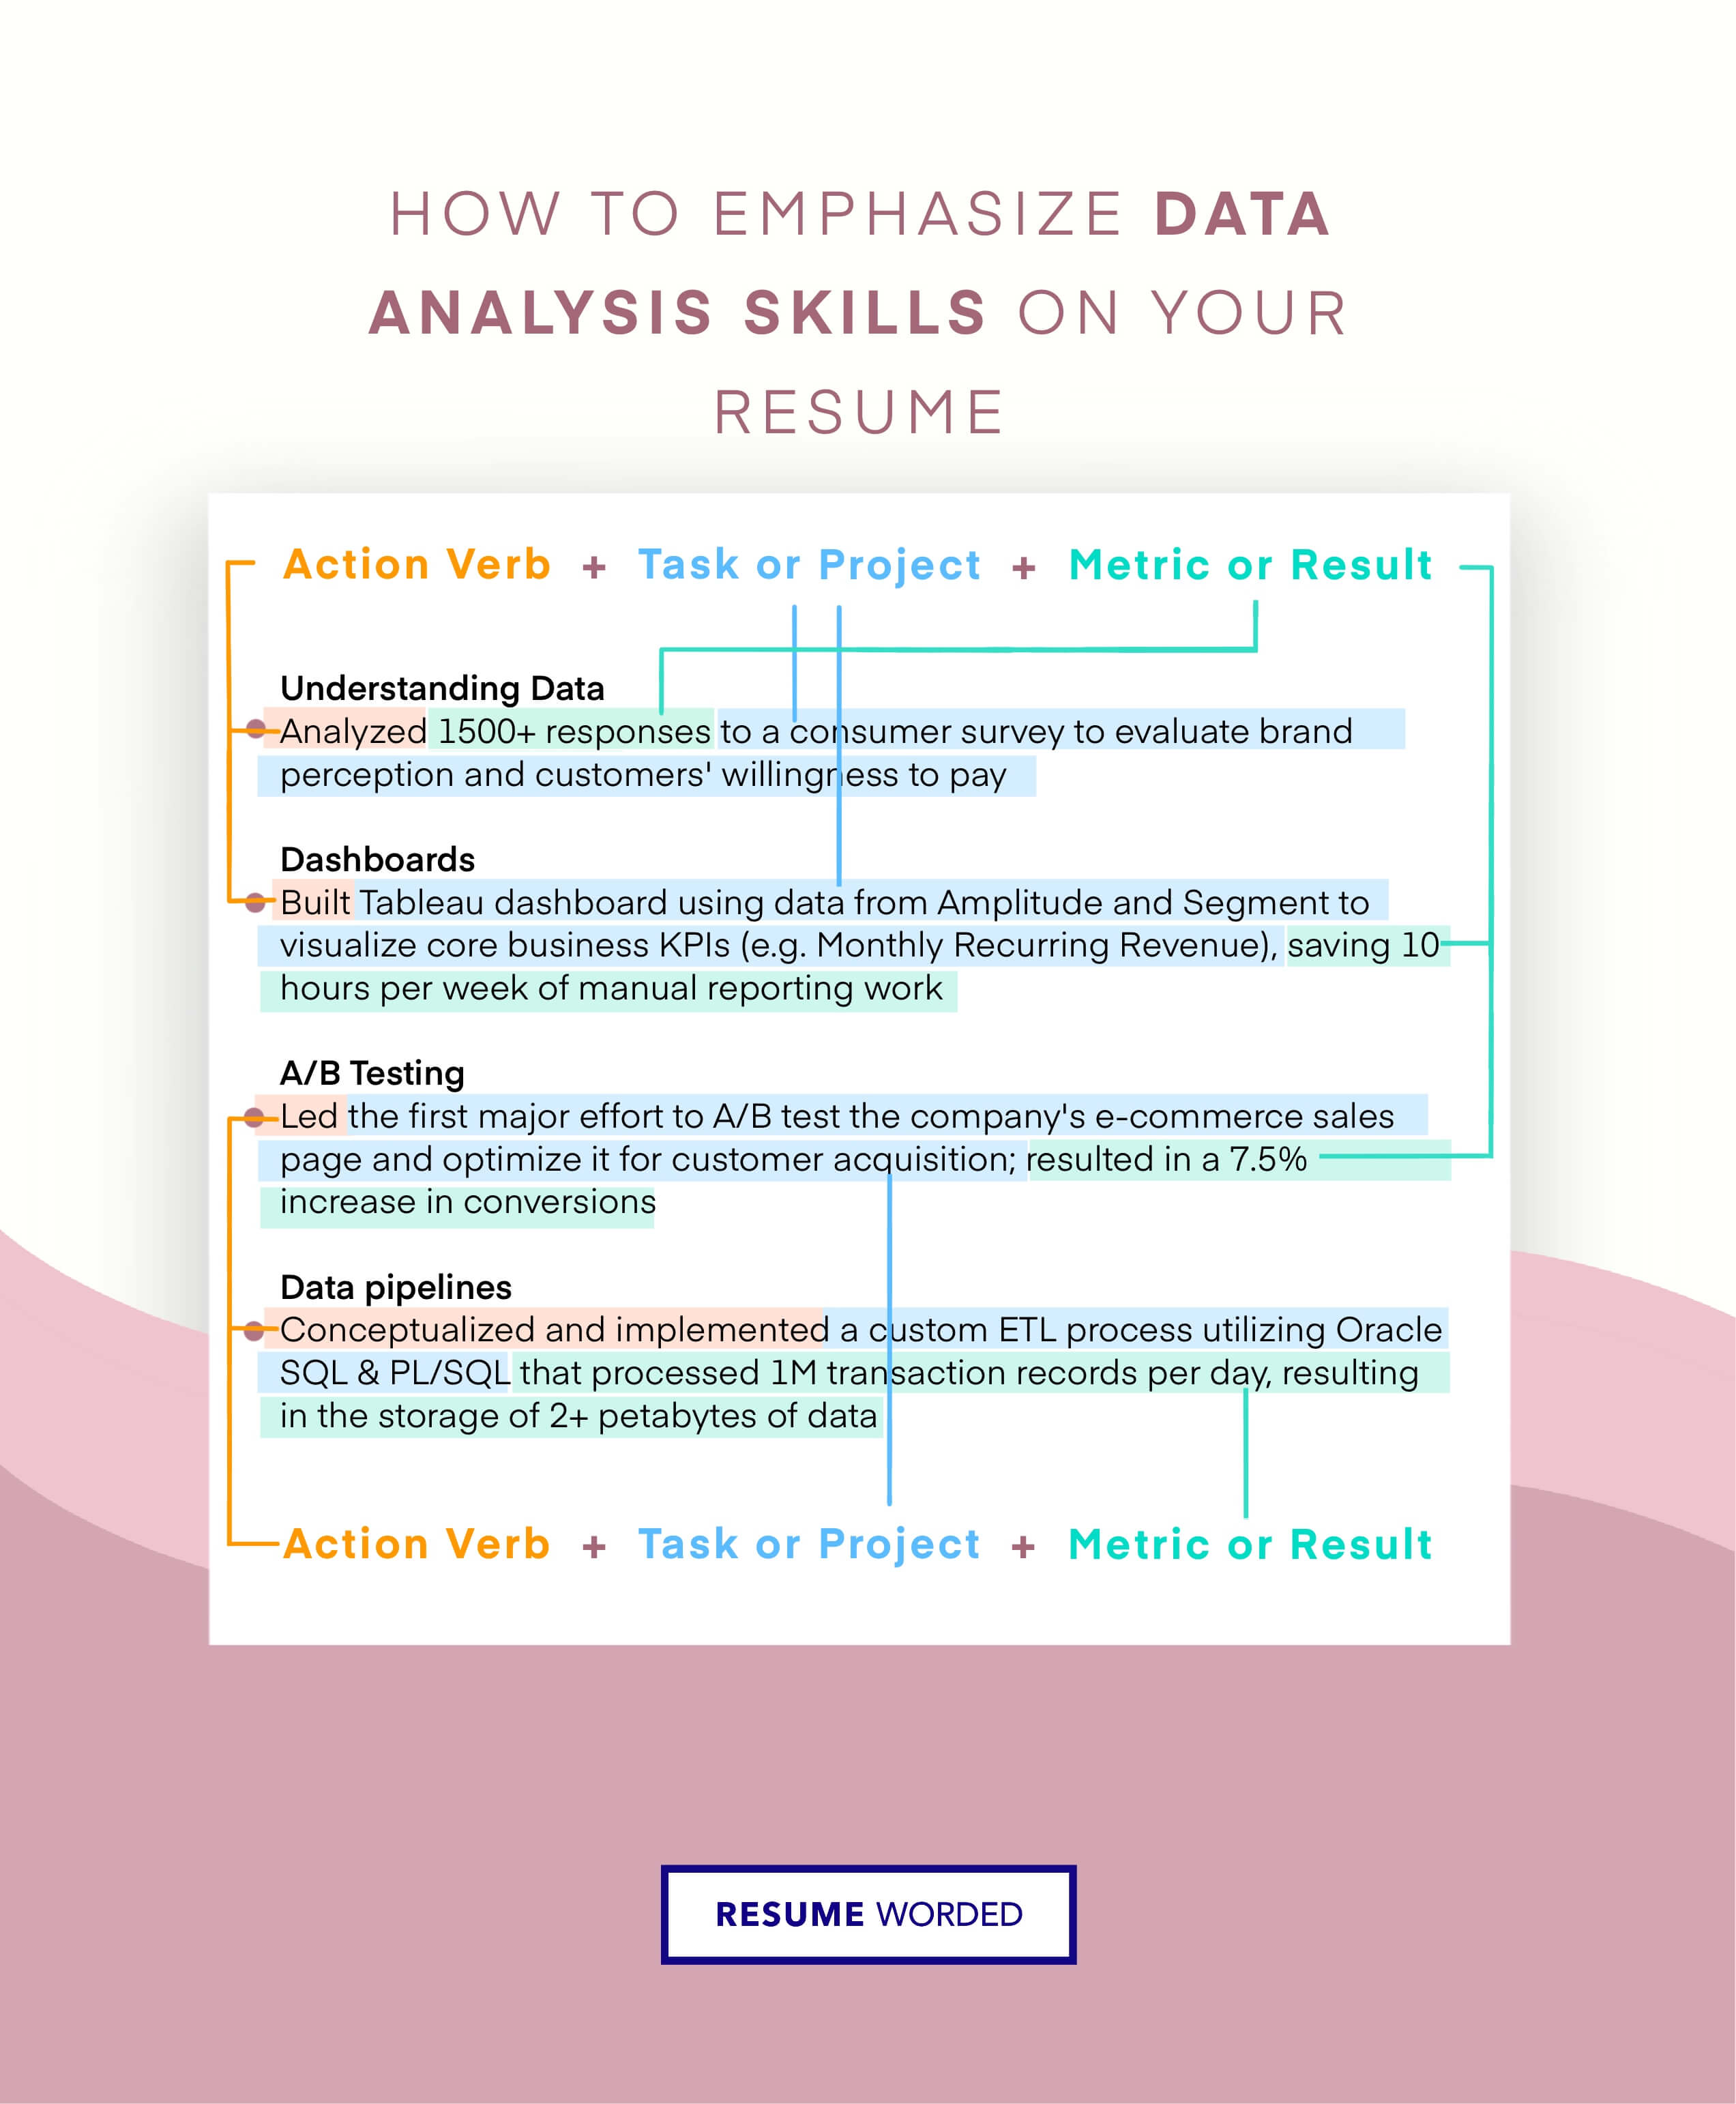 Showcase your data storytelling abilities - Experienced Data Analyst CV